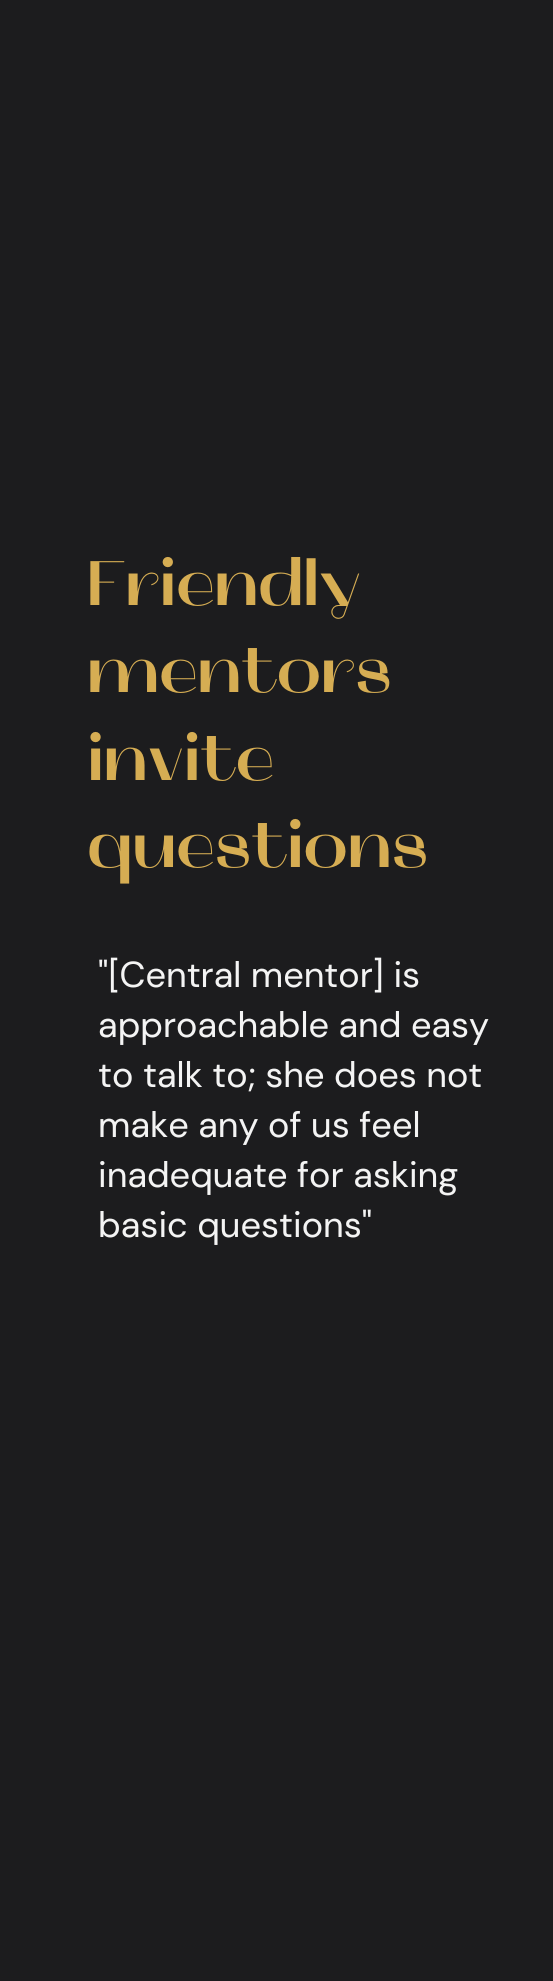 mentor quote